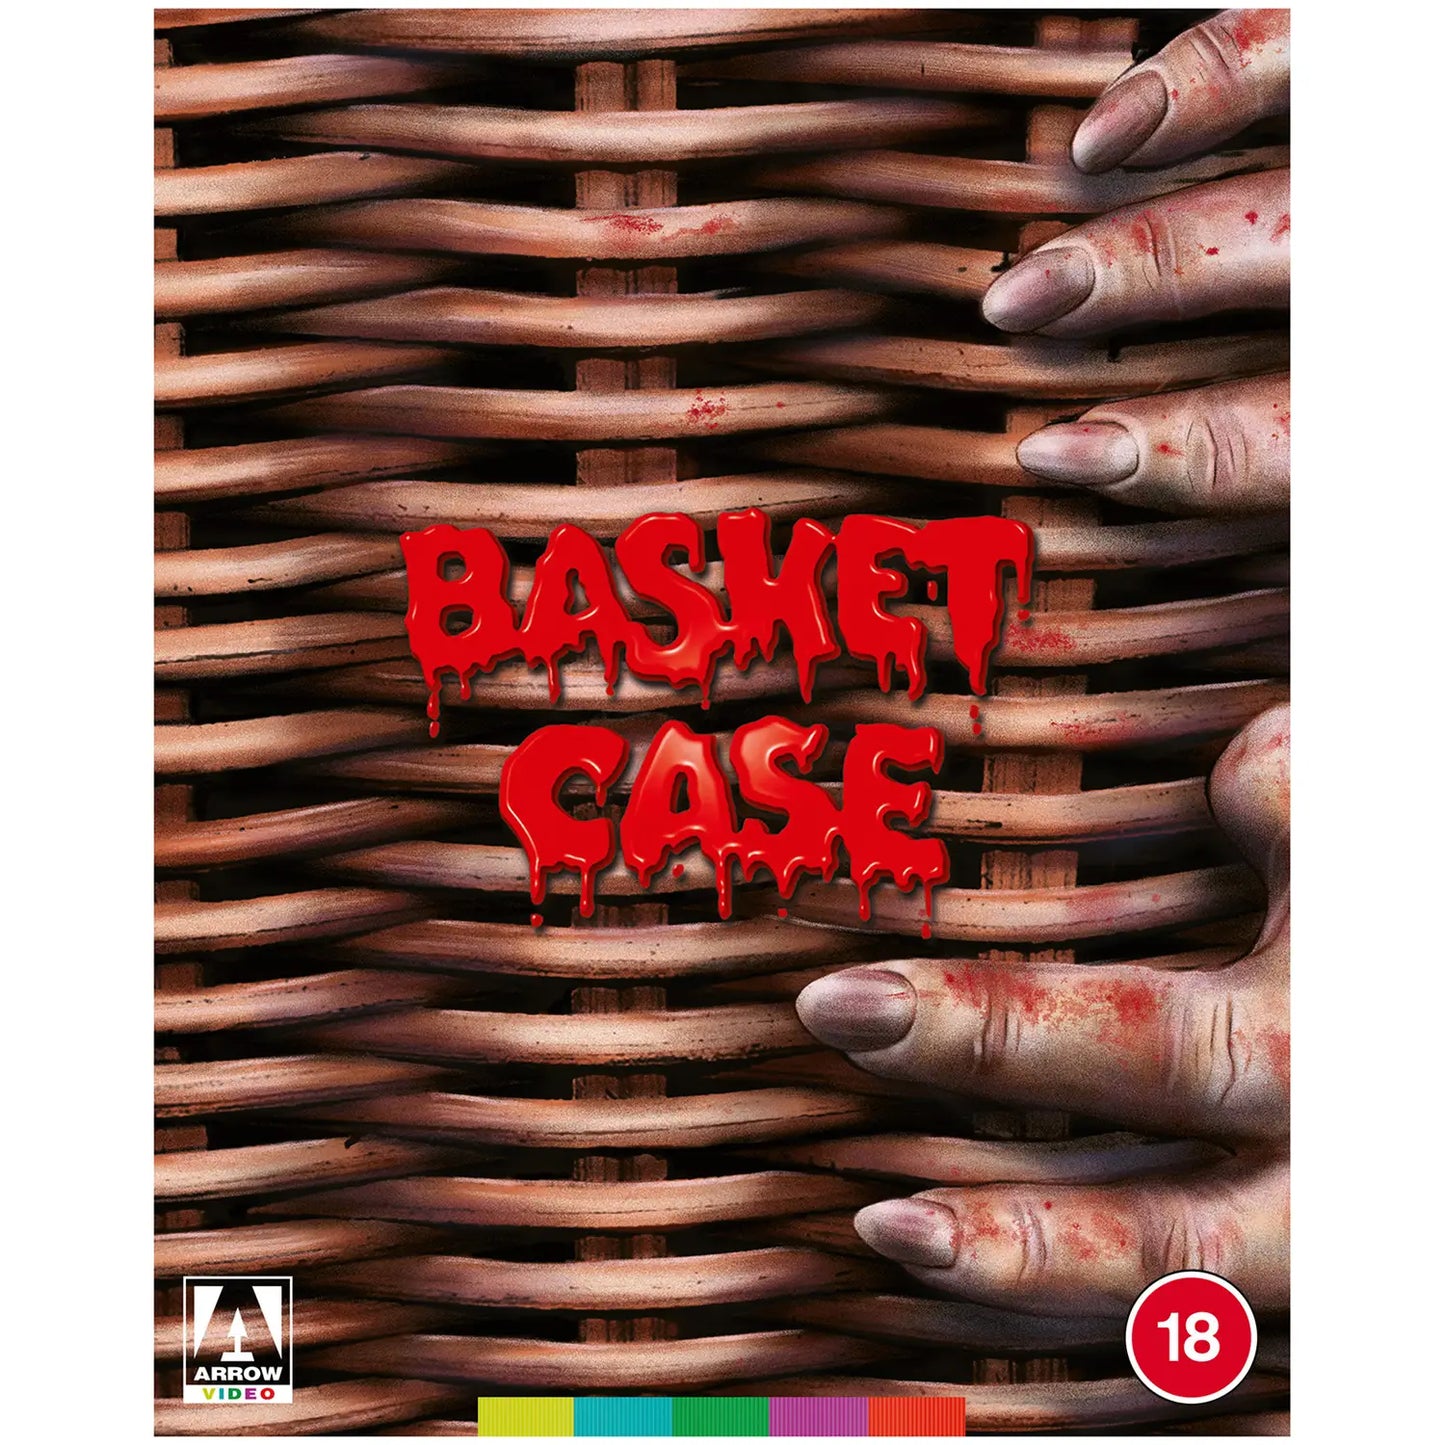 Basket Case Limited Edition Arrow Video Blu-Ray [PRE-ORDER] [SLIPCOVER]